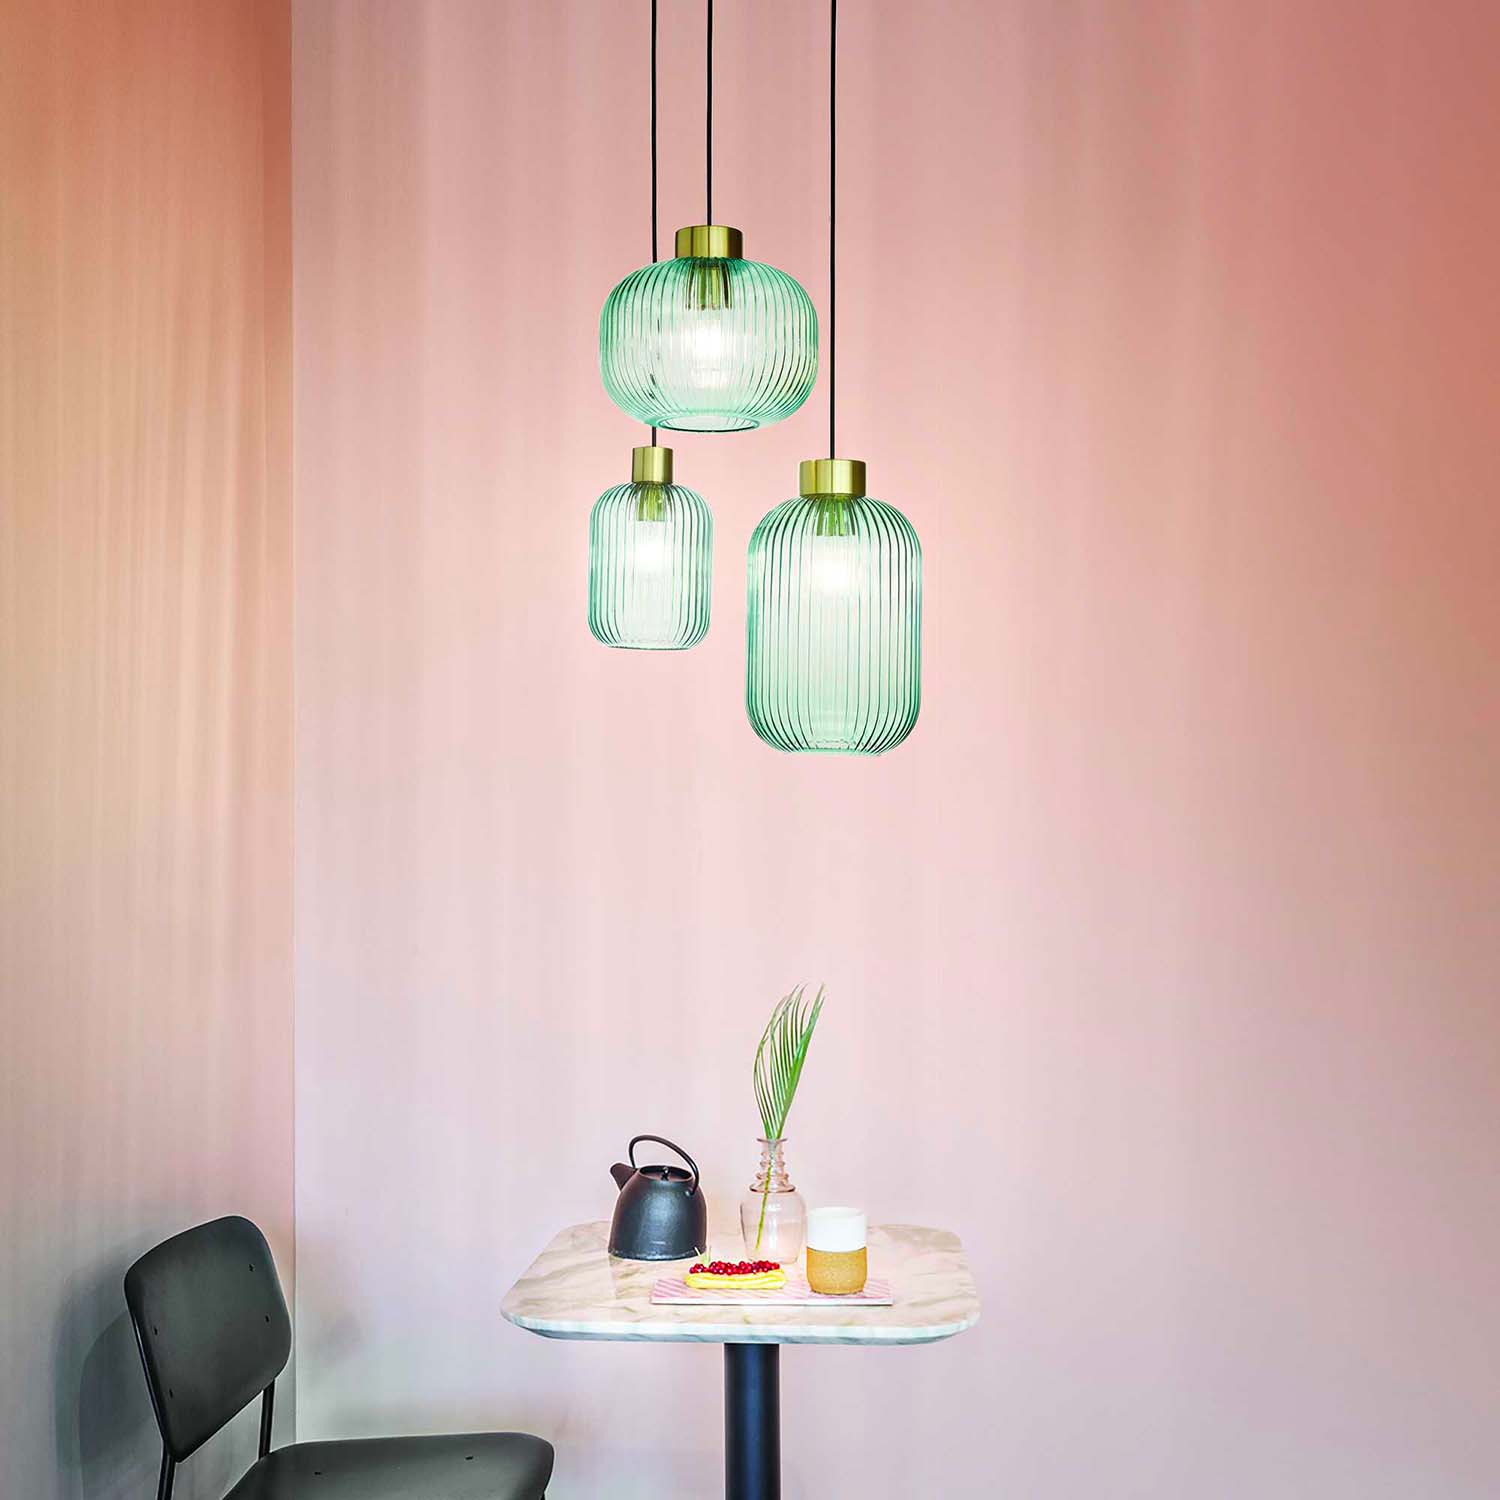 MINT - Chic pendant light in smoked or mint green glass